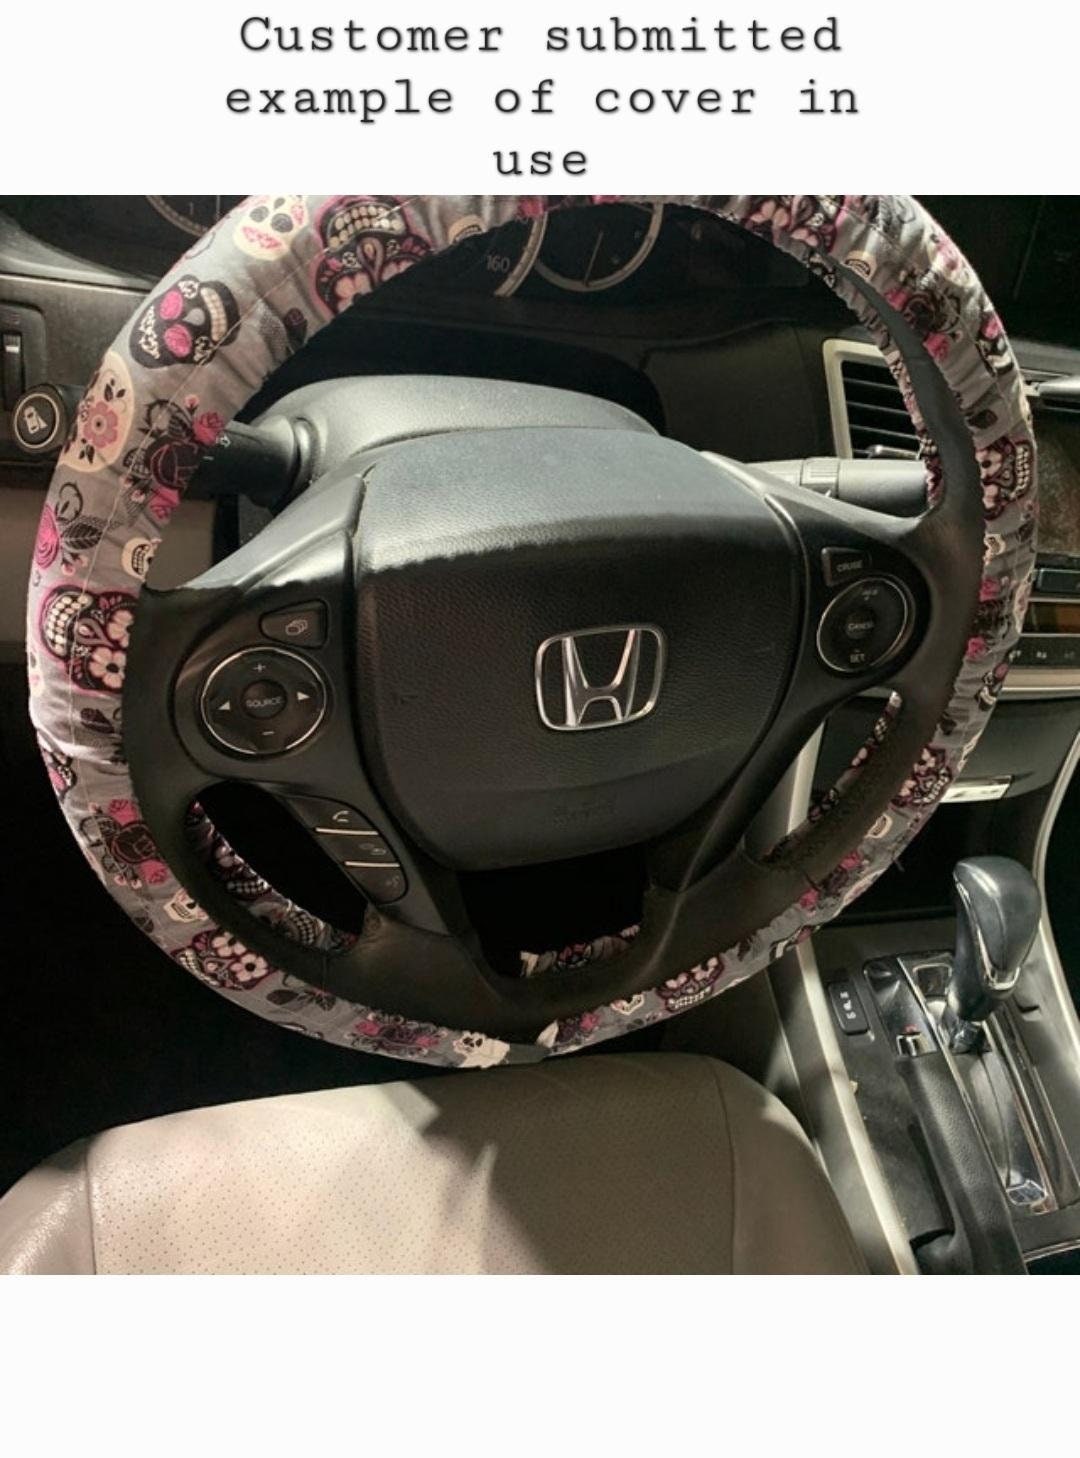 Hawaiian Floral Steering Wheel Cover, 100% Cotton, Washable, Custom Car Accessories - Harlow's Store and Garden Gifts